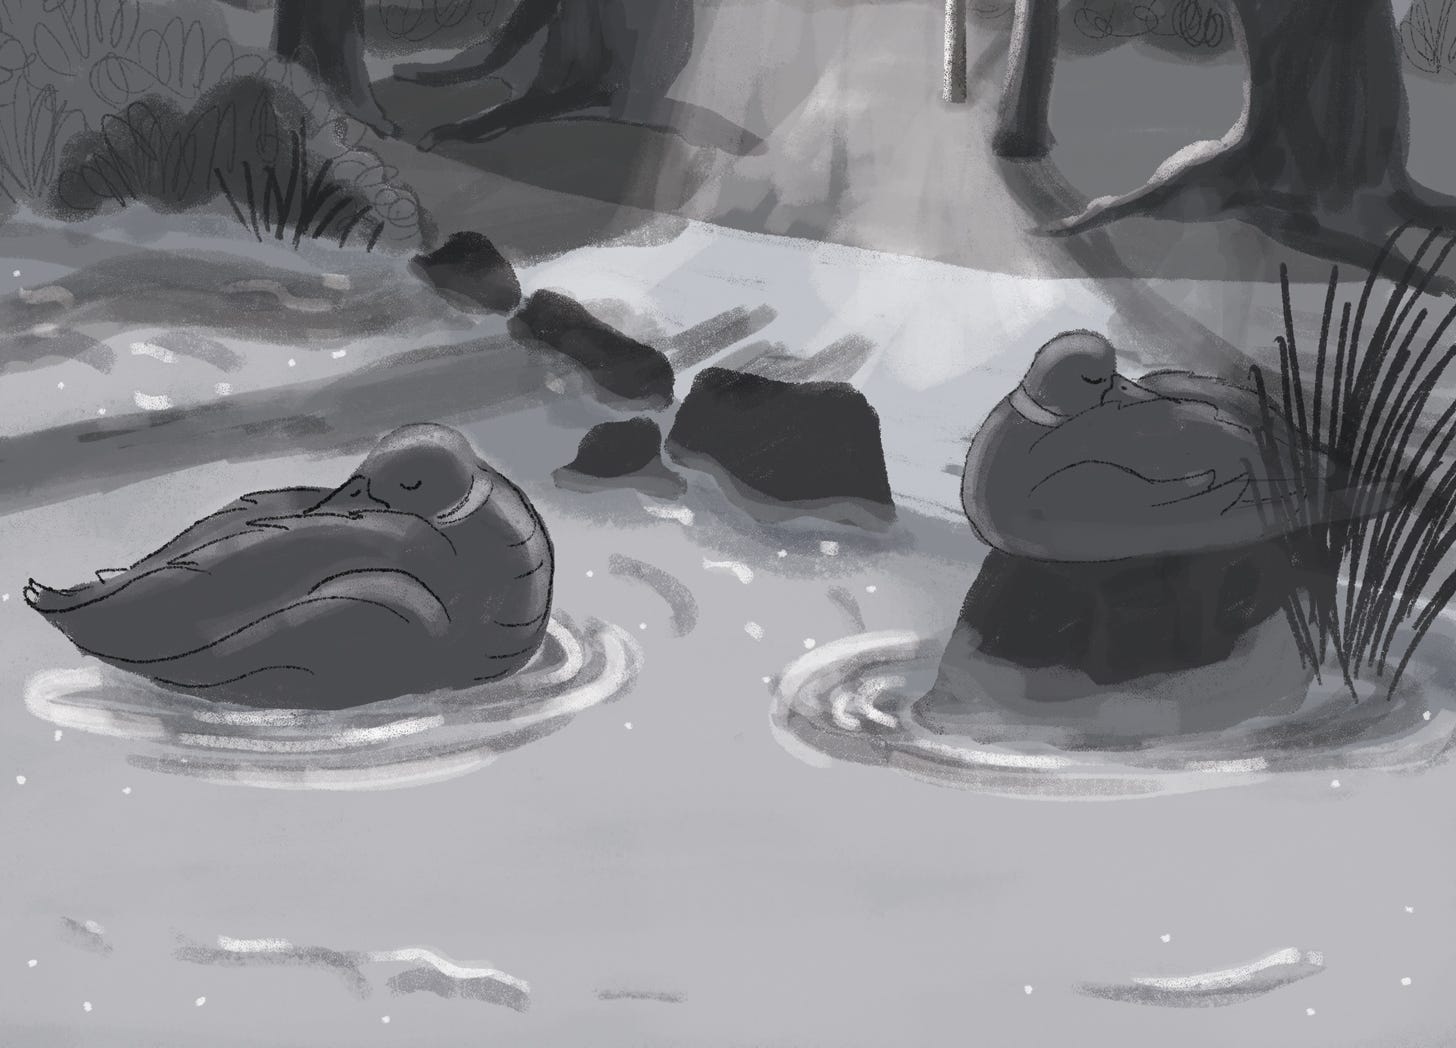 A black and white digital drawing of two ducks sleeping on a pond